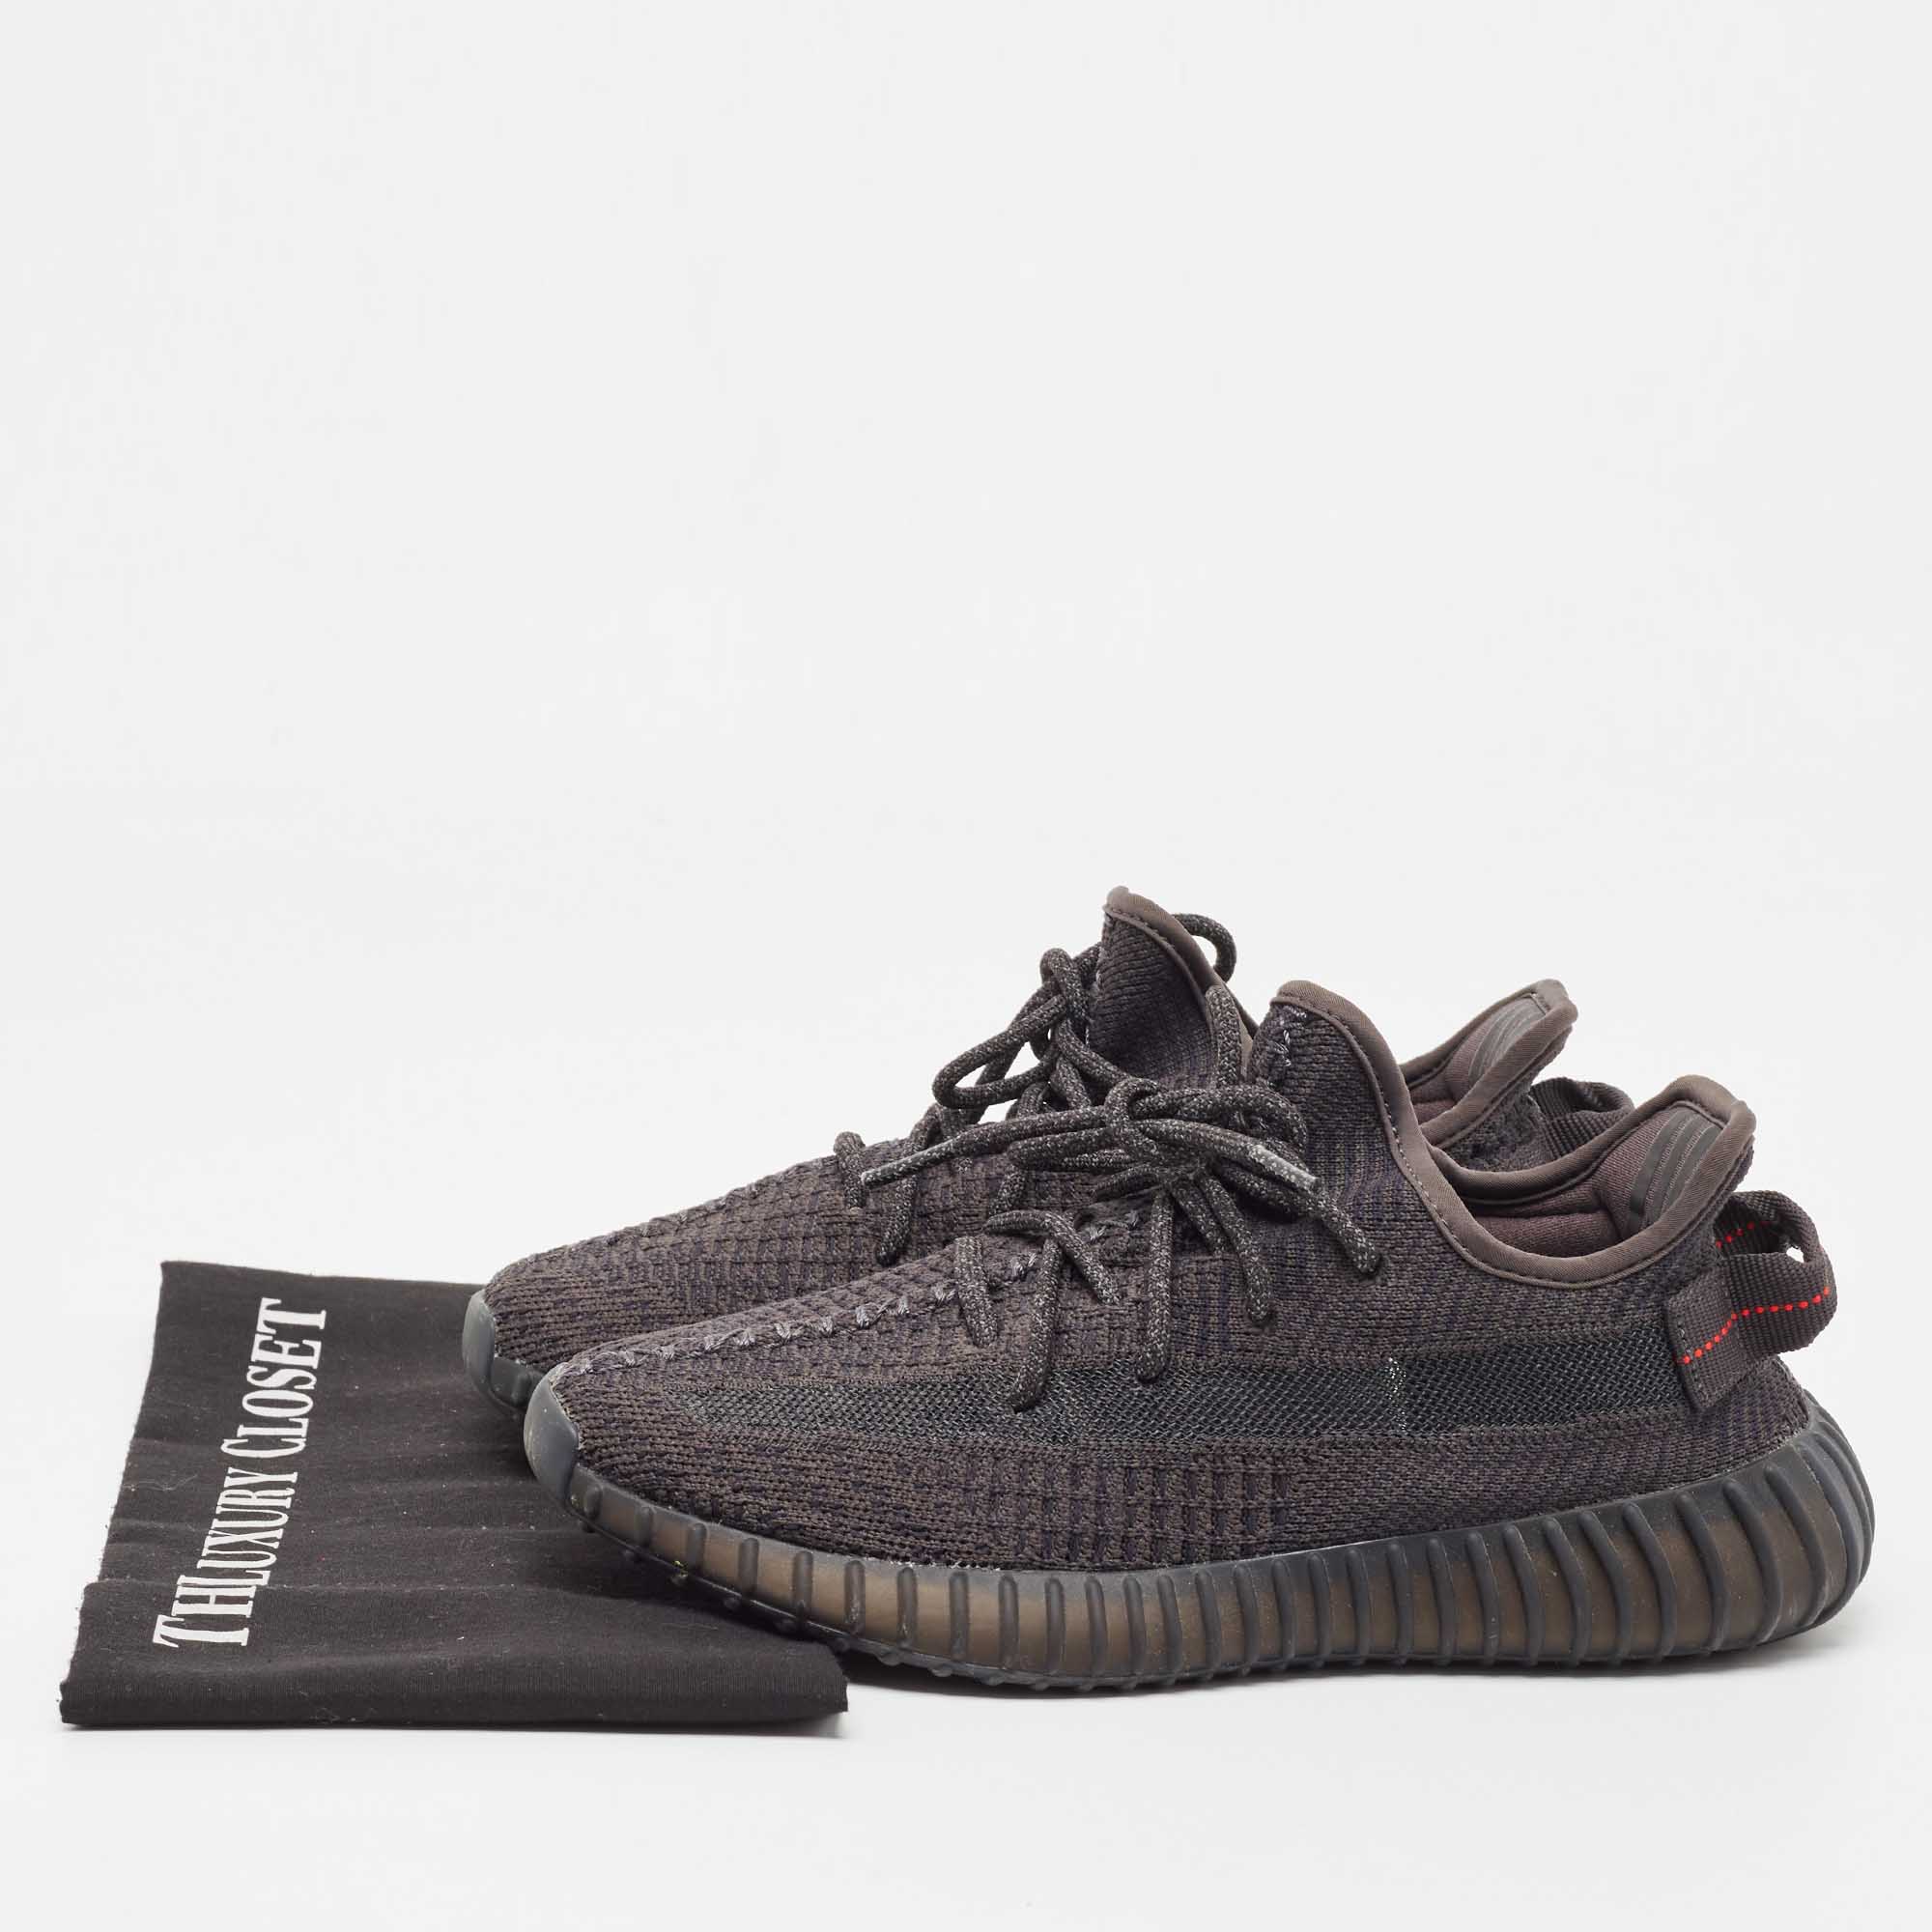 Yeezy X Adidas Black Knit Fabric Boost 350 V2 -Static-Black-Reflective Sneakers Size 38